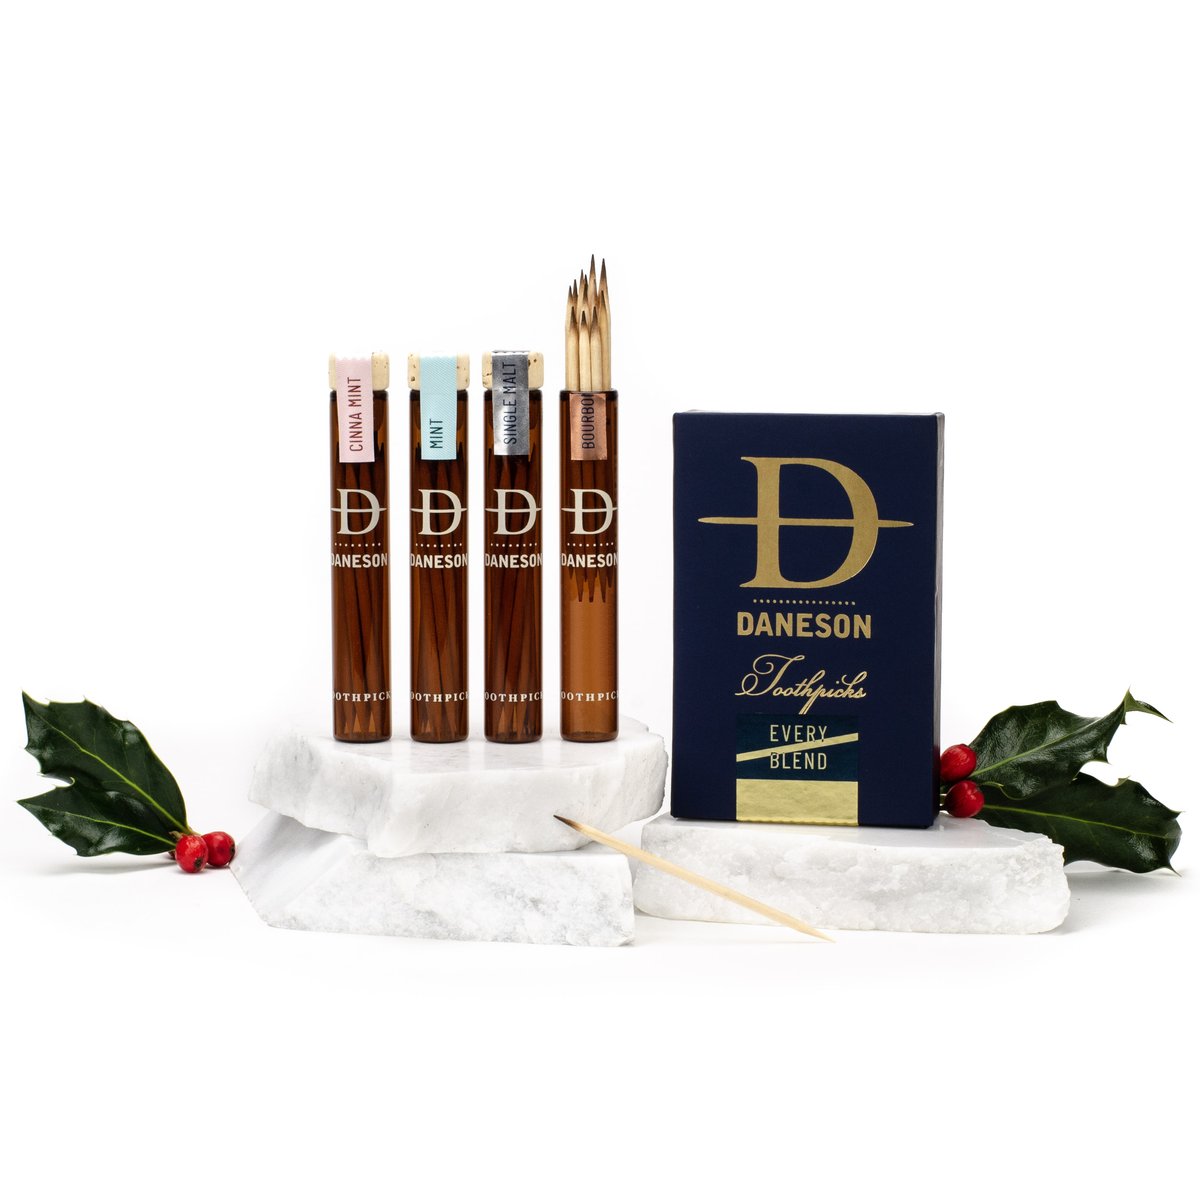 Daneson flavored toothpicks: Hostess gifts under $50